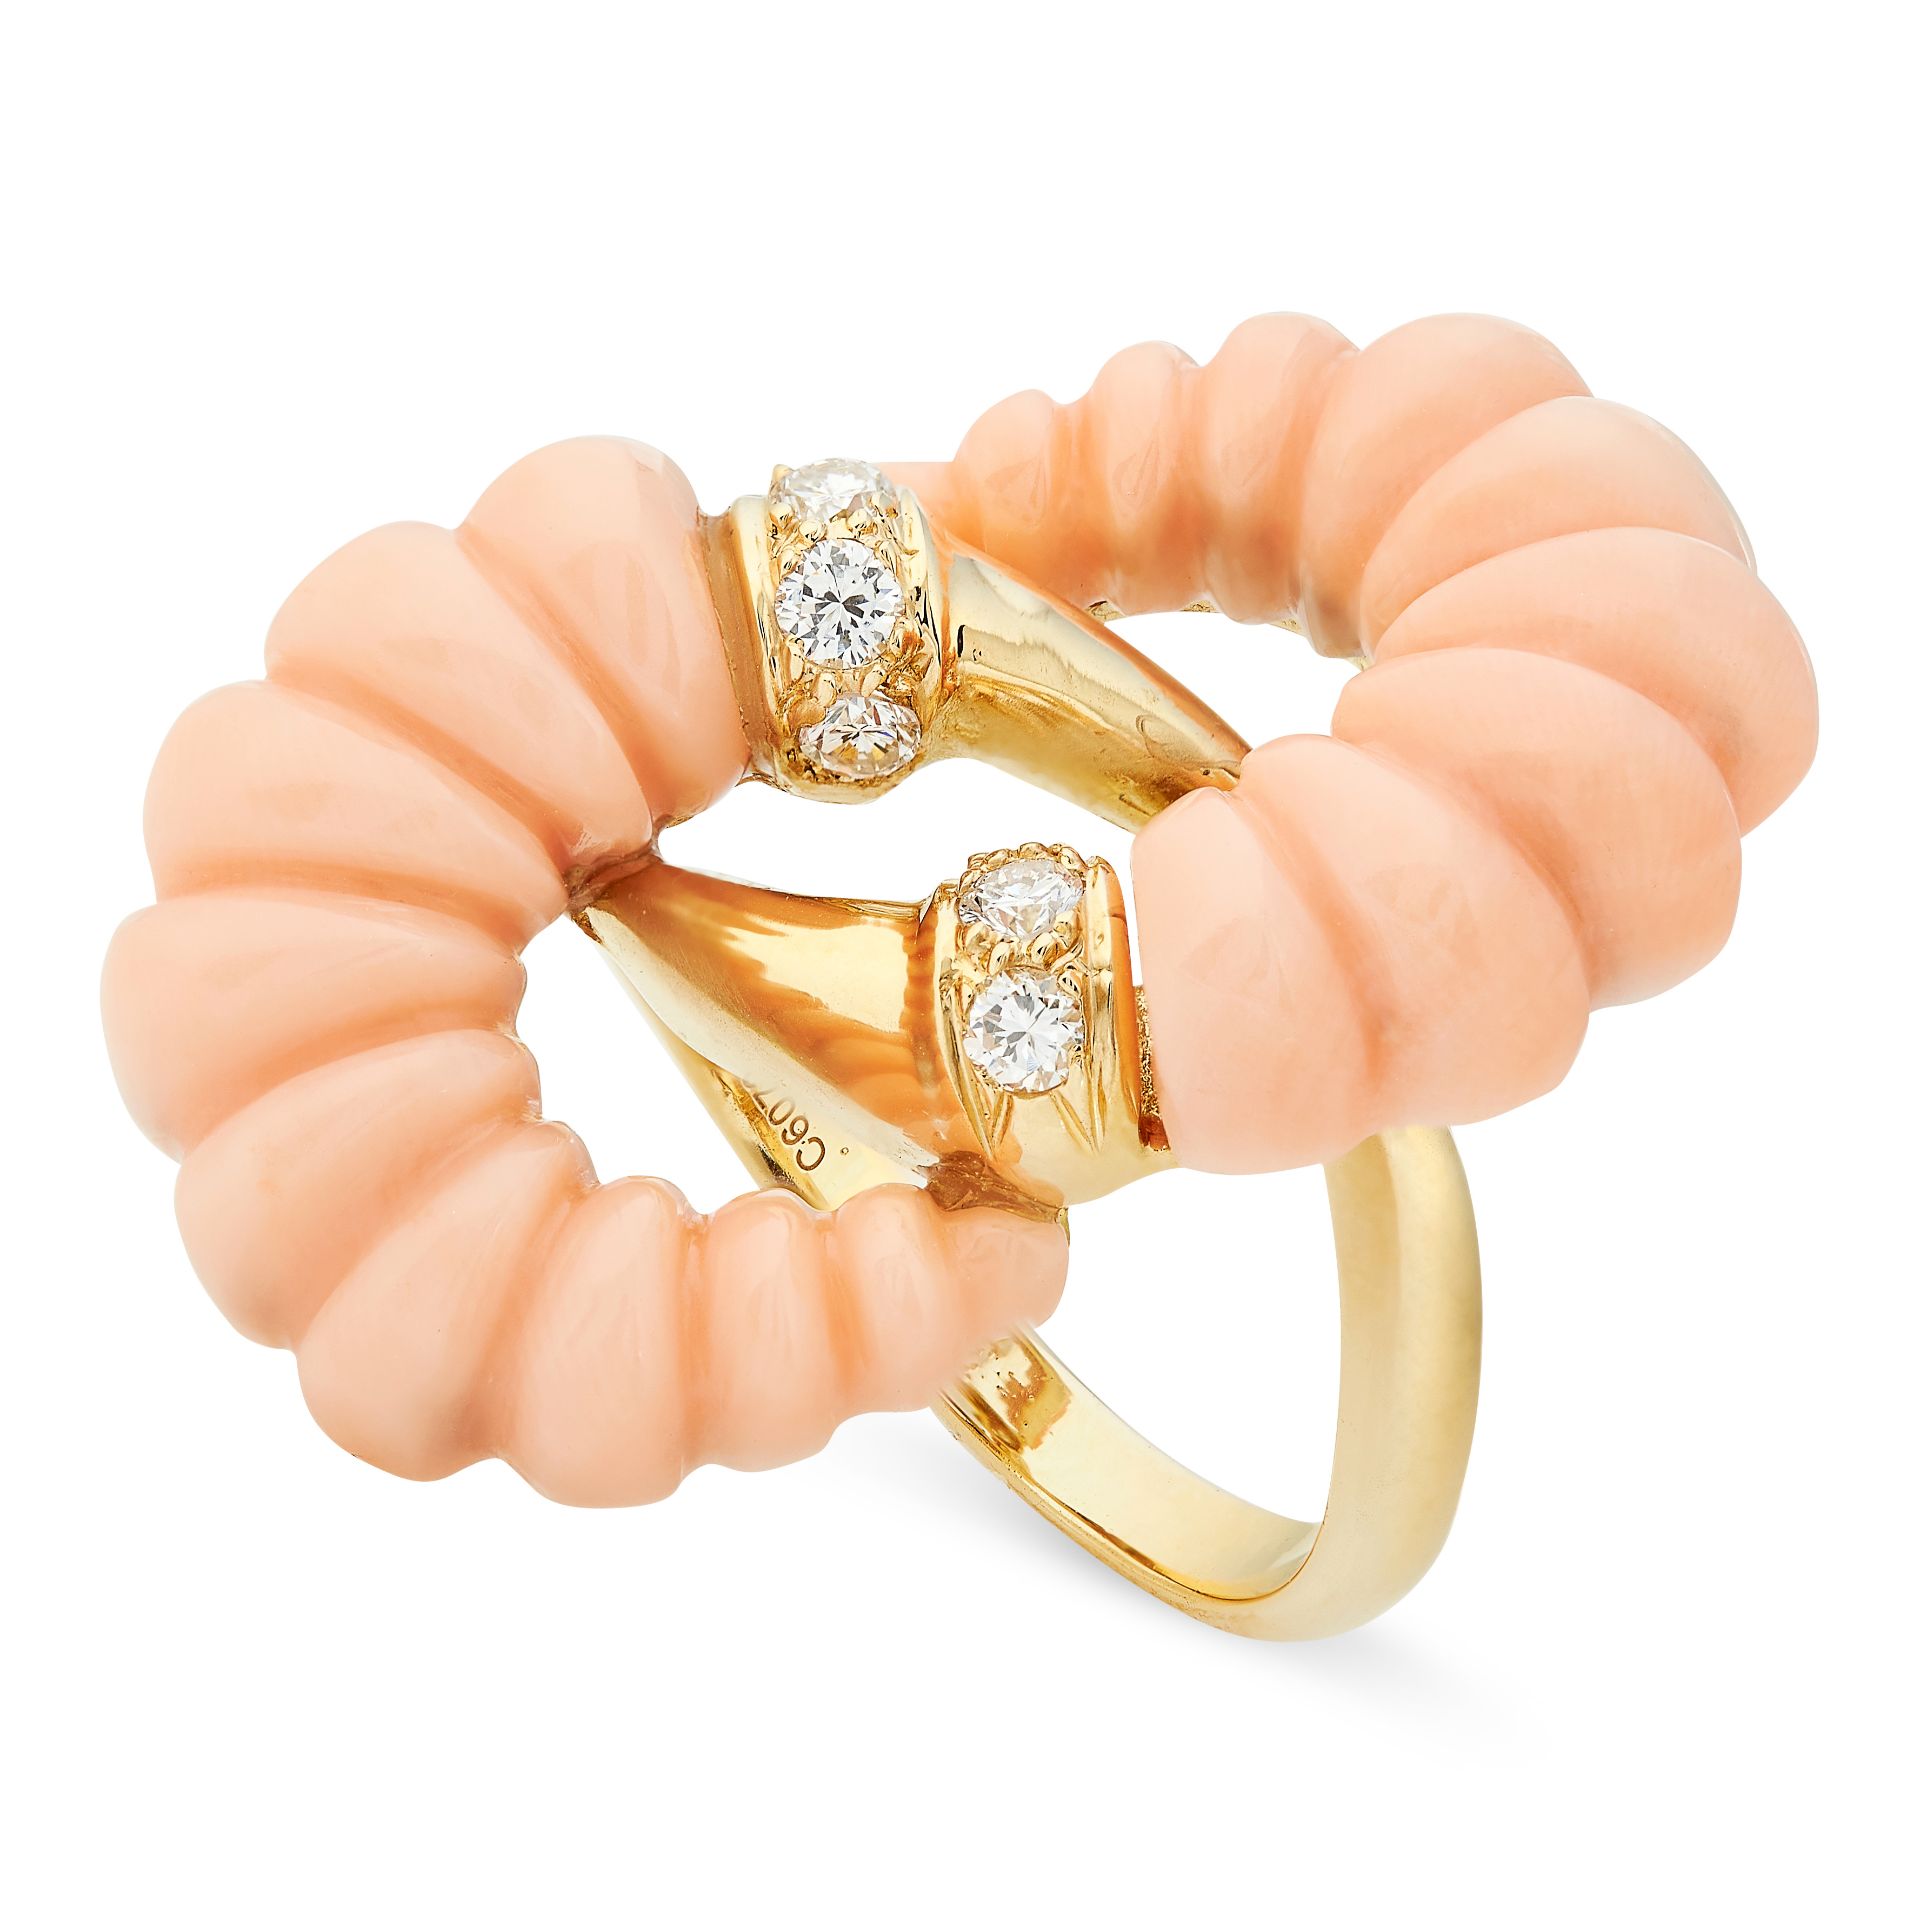 A VINTAGE CORAL AND DIAMOND RING, VAN CLEEF & ARPELS in 18ct yellow gold, the face formed of two